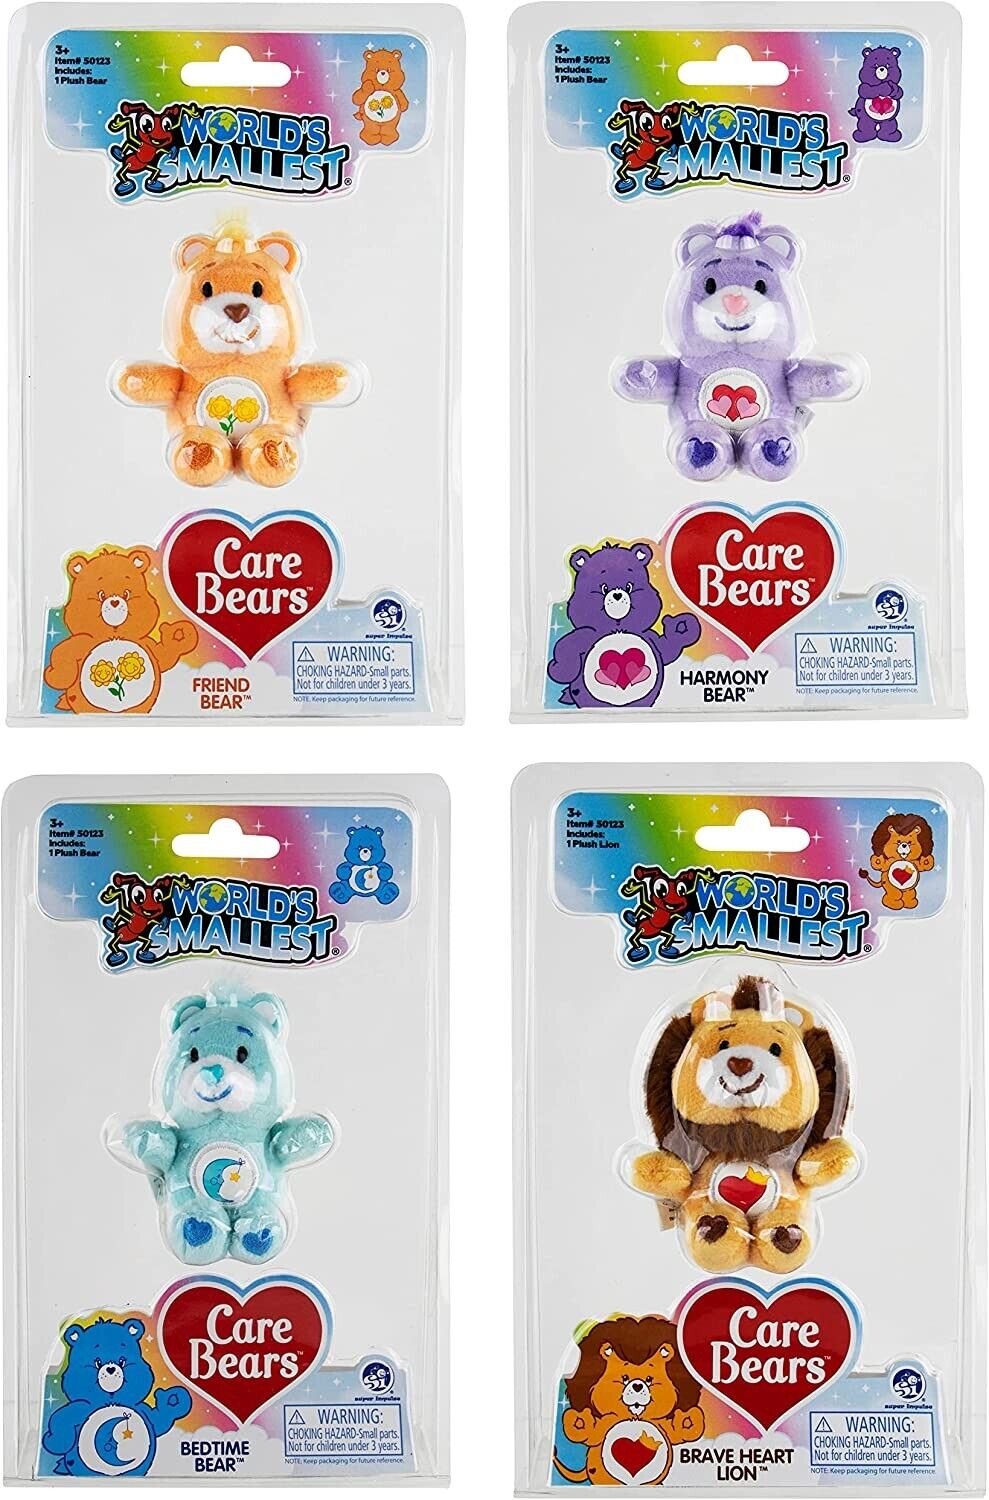 World’s Smallest Care Bears Series 3 (4 Pack)